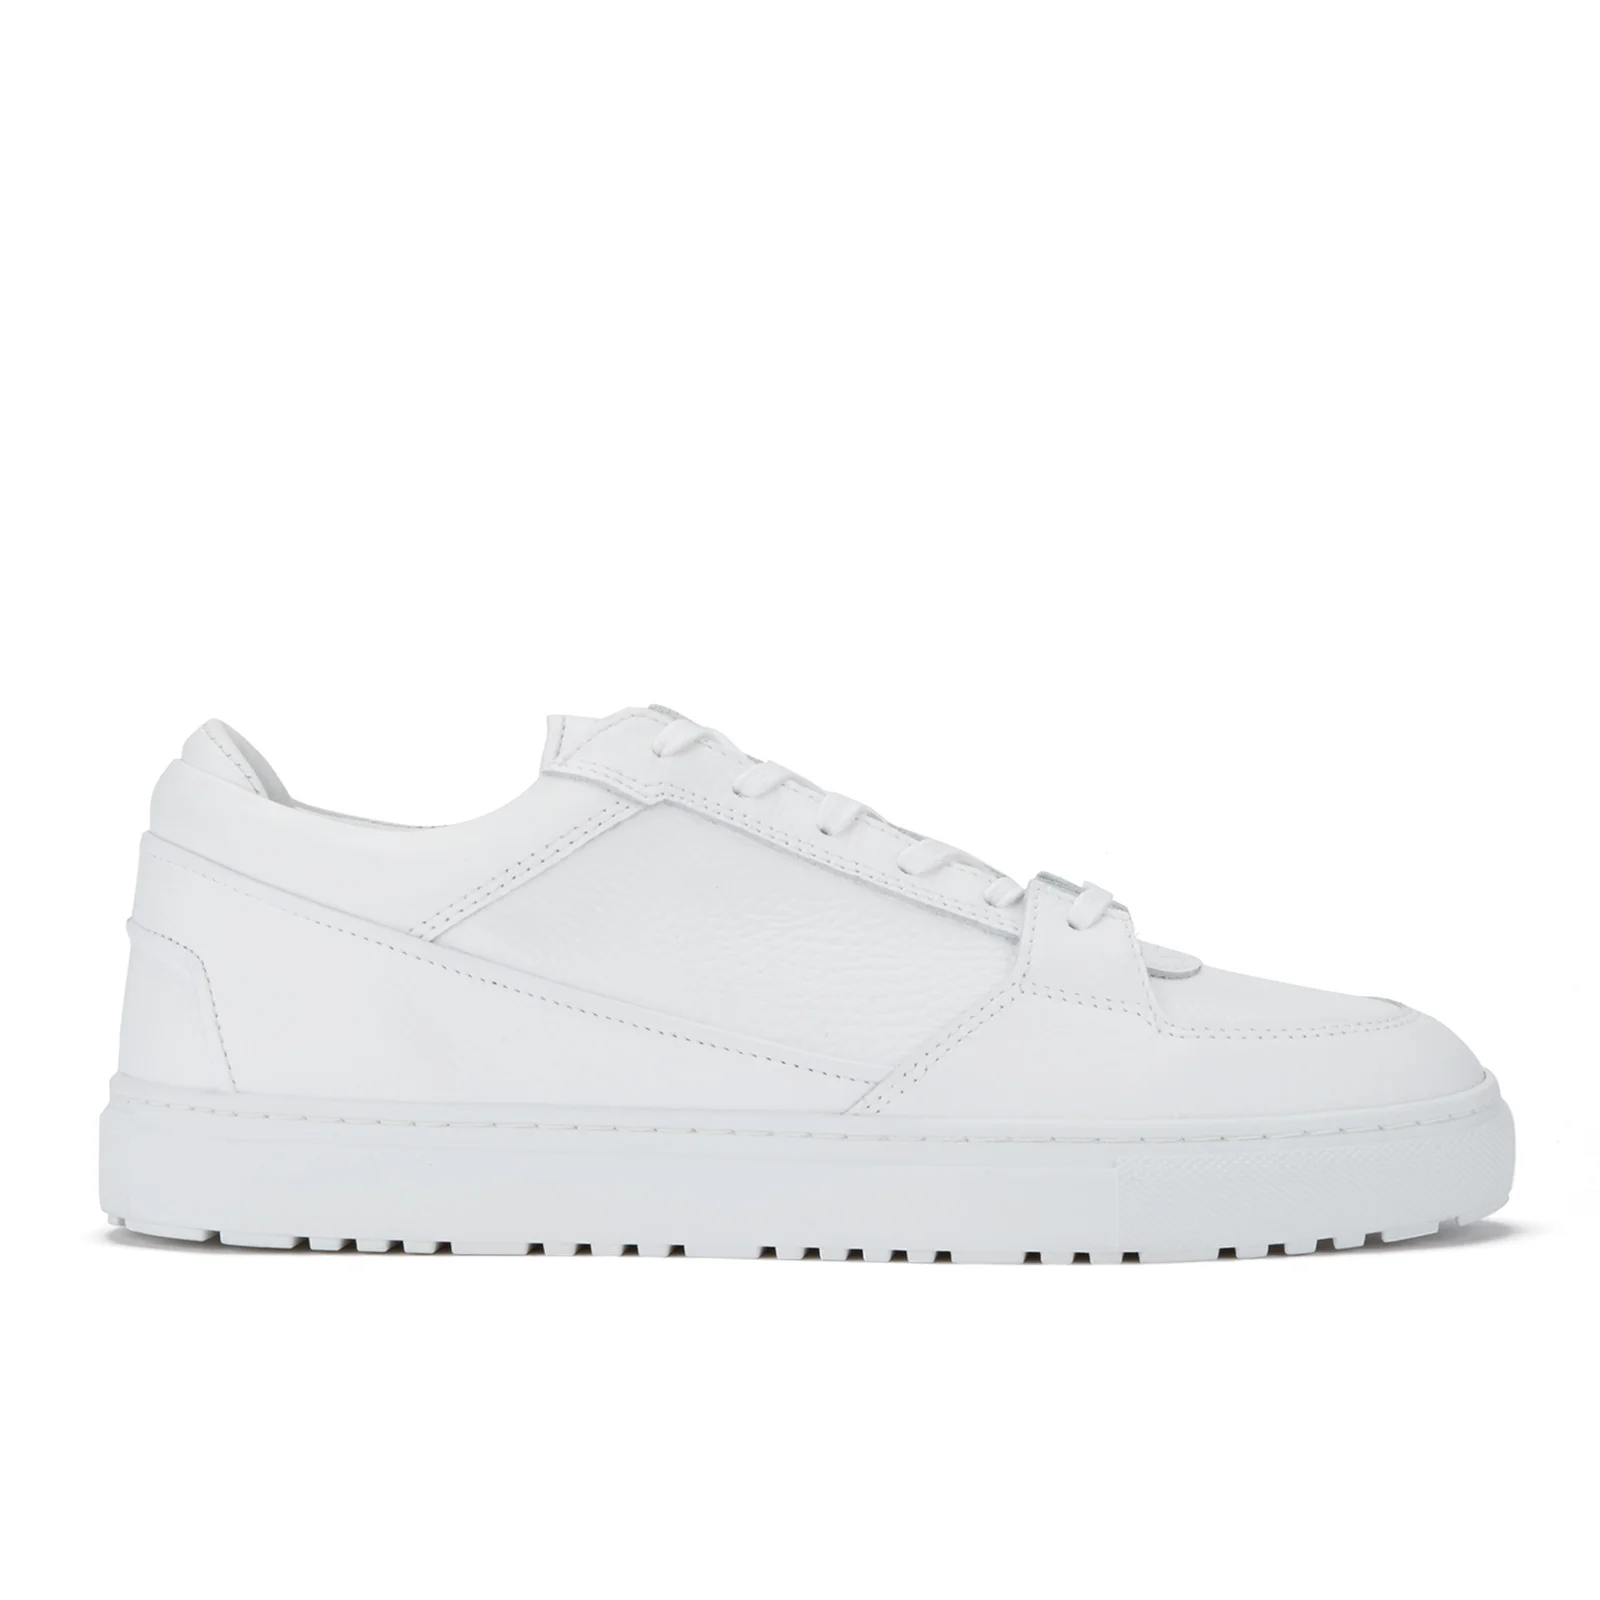 ETQ. Men's Low Top 3 Leather Trainers - White Image 1